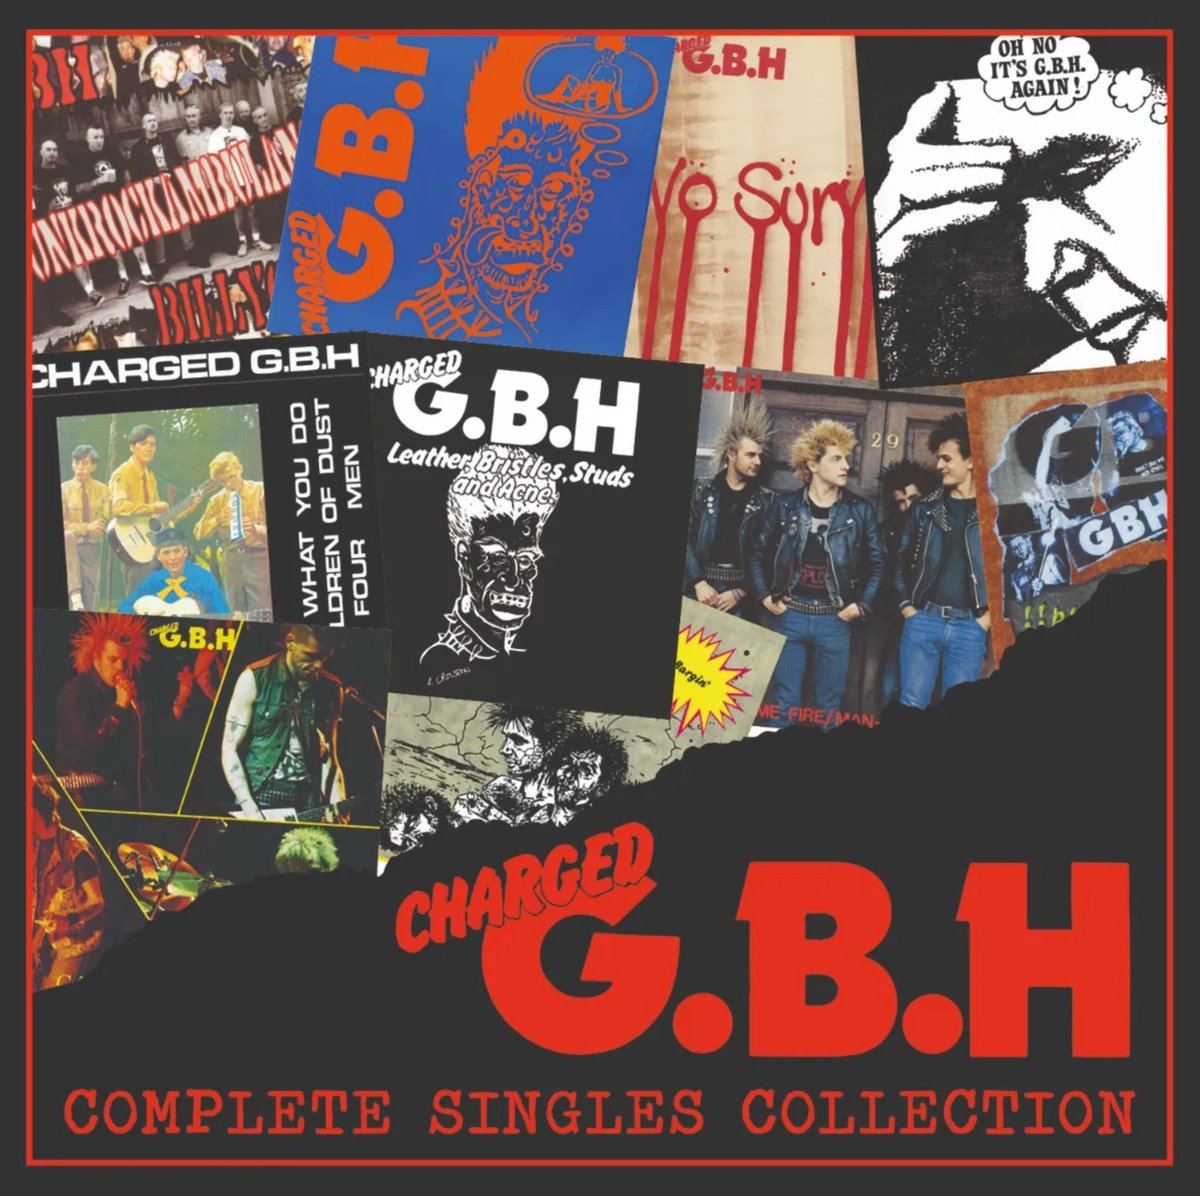 Coming in May on Captain Oi, GBH - The Complete Singles Collection. A 2CD deluxe digipack containing all of the singles issued by “UK/82” Punk Rock legends G.B.H. 👉 cherryred.co/GBH